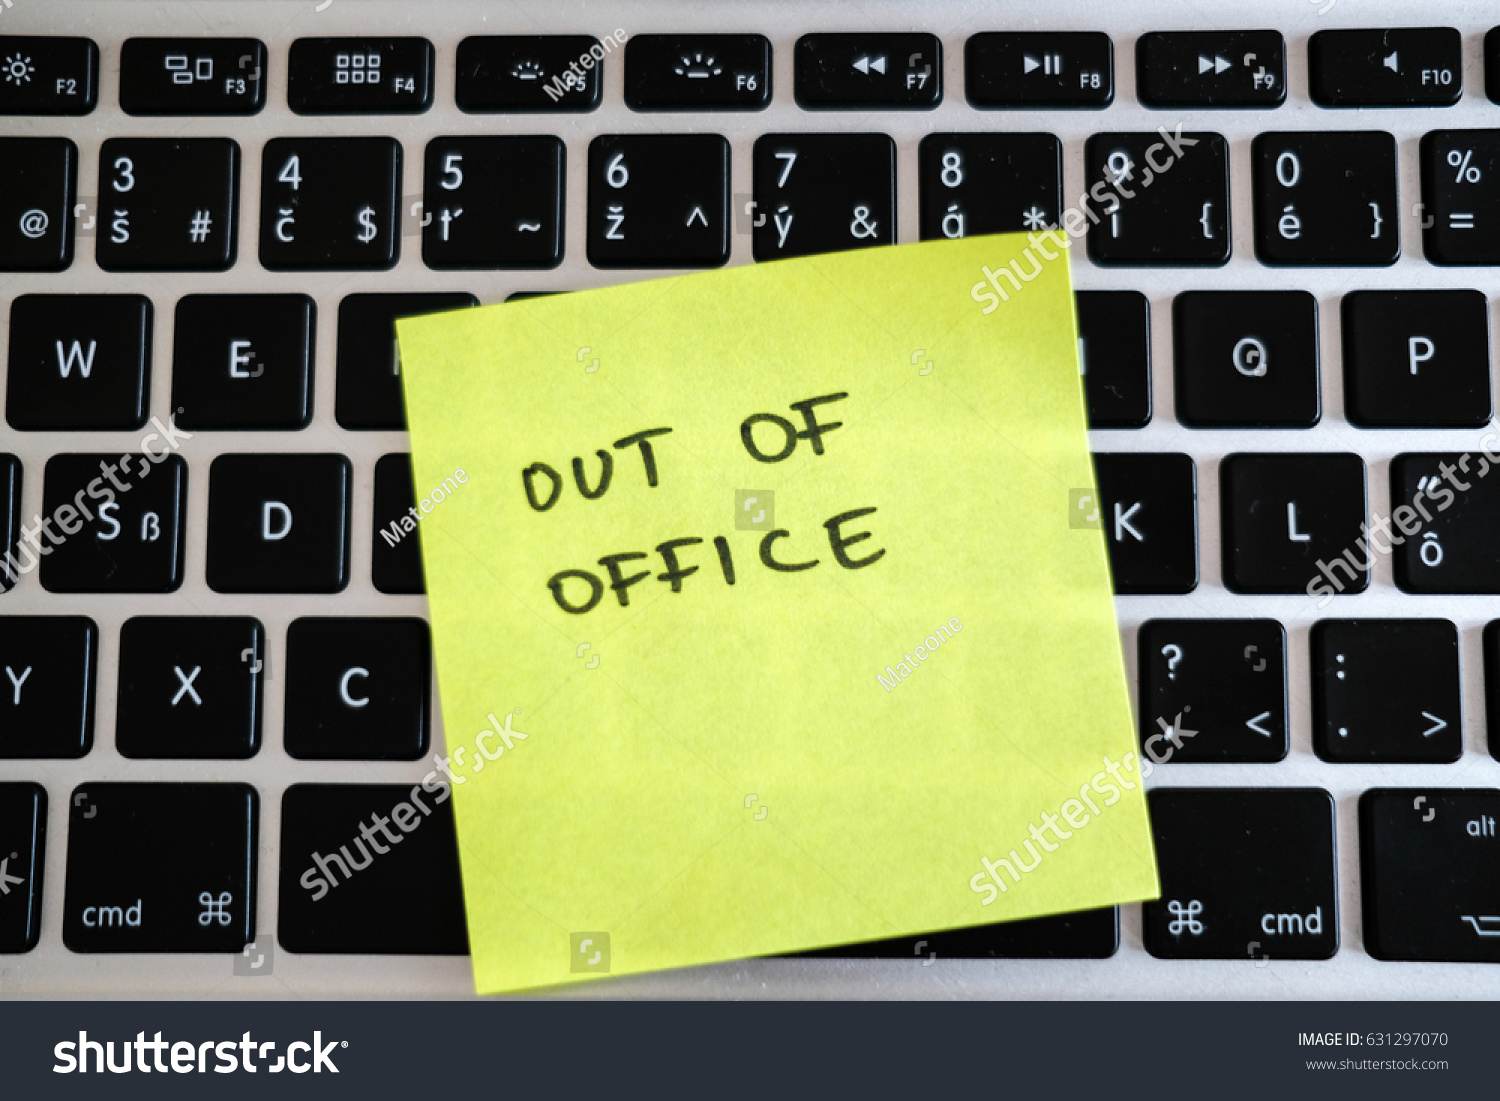 Vacation needed. Holiday office message on laptop. Out of office. #631297070